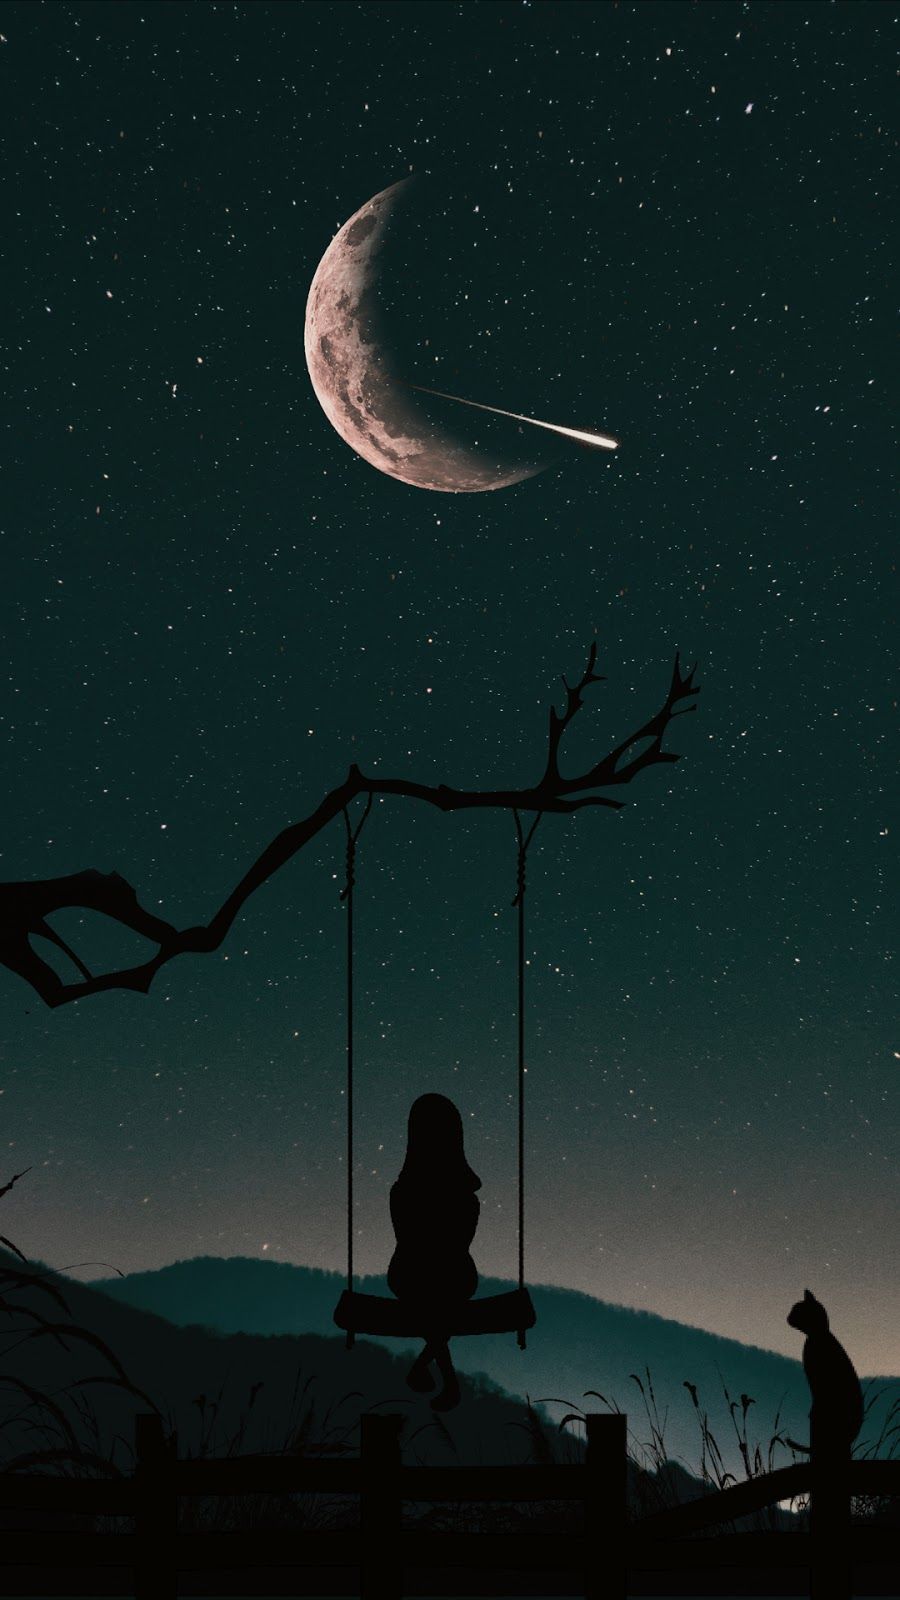 Lonely in the night. Night sky wallpaper, Cute wallpaper background, Scenery wallpaper